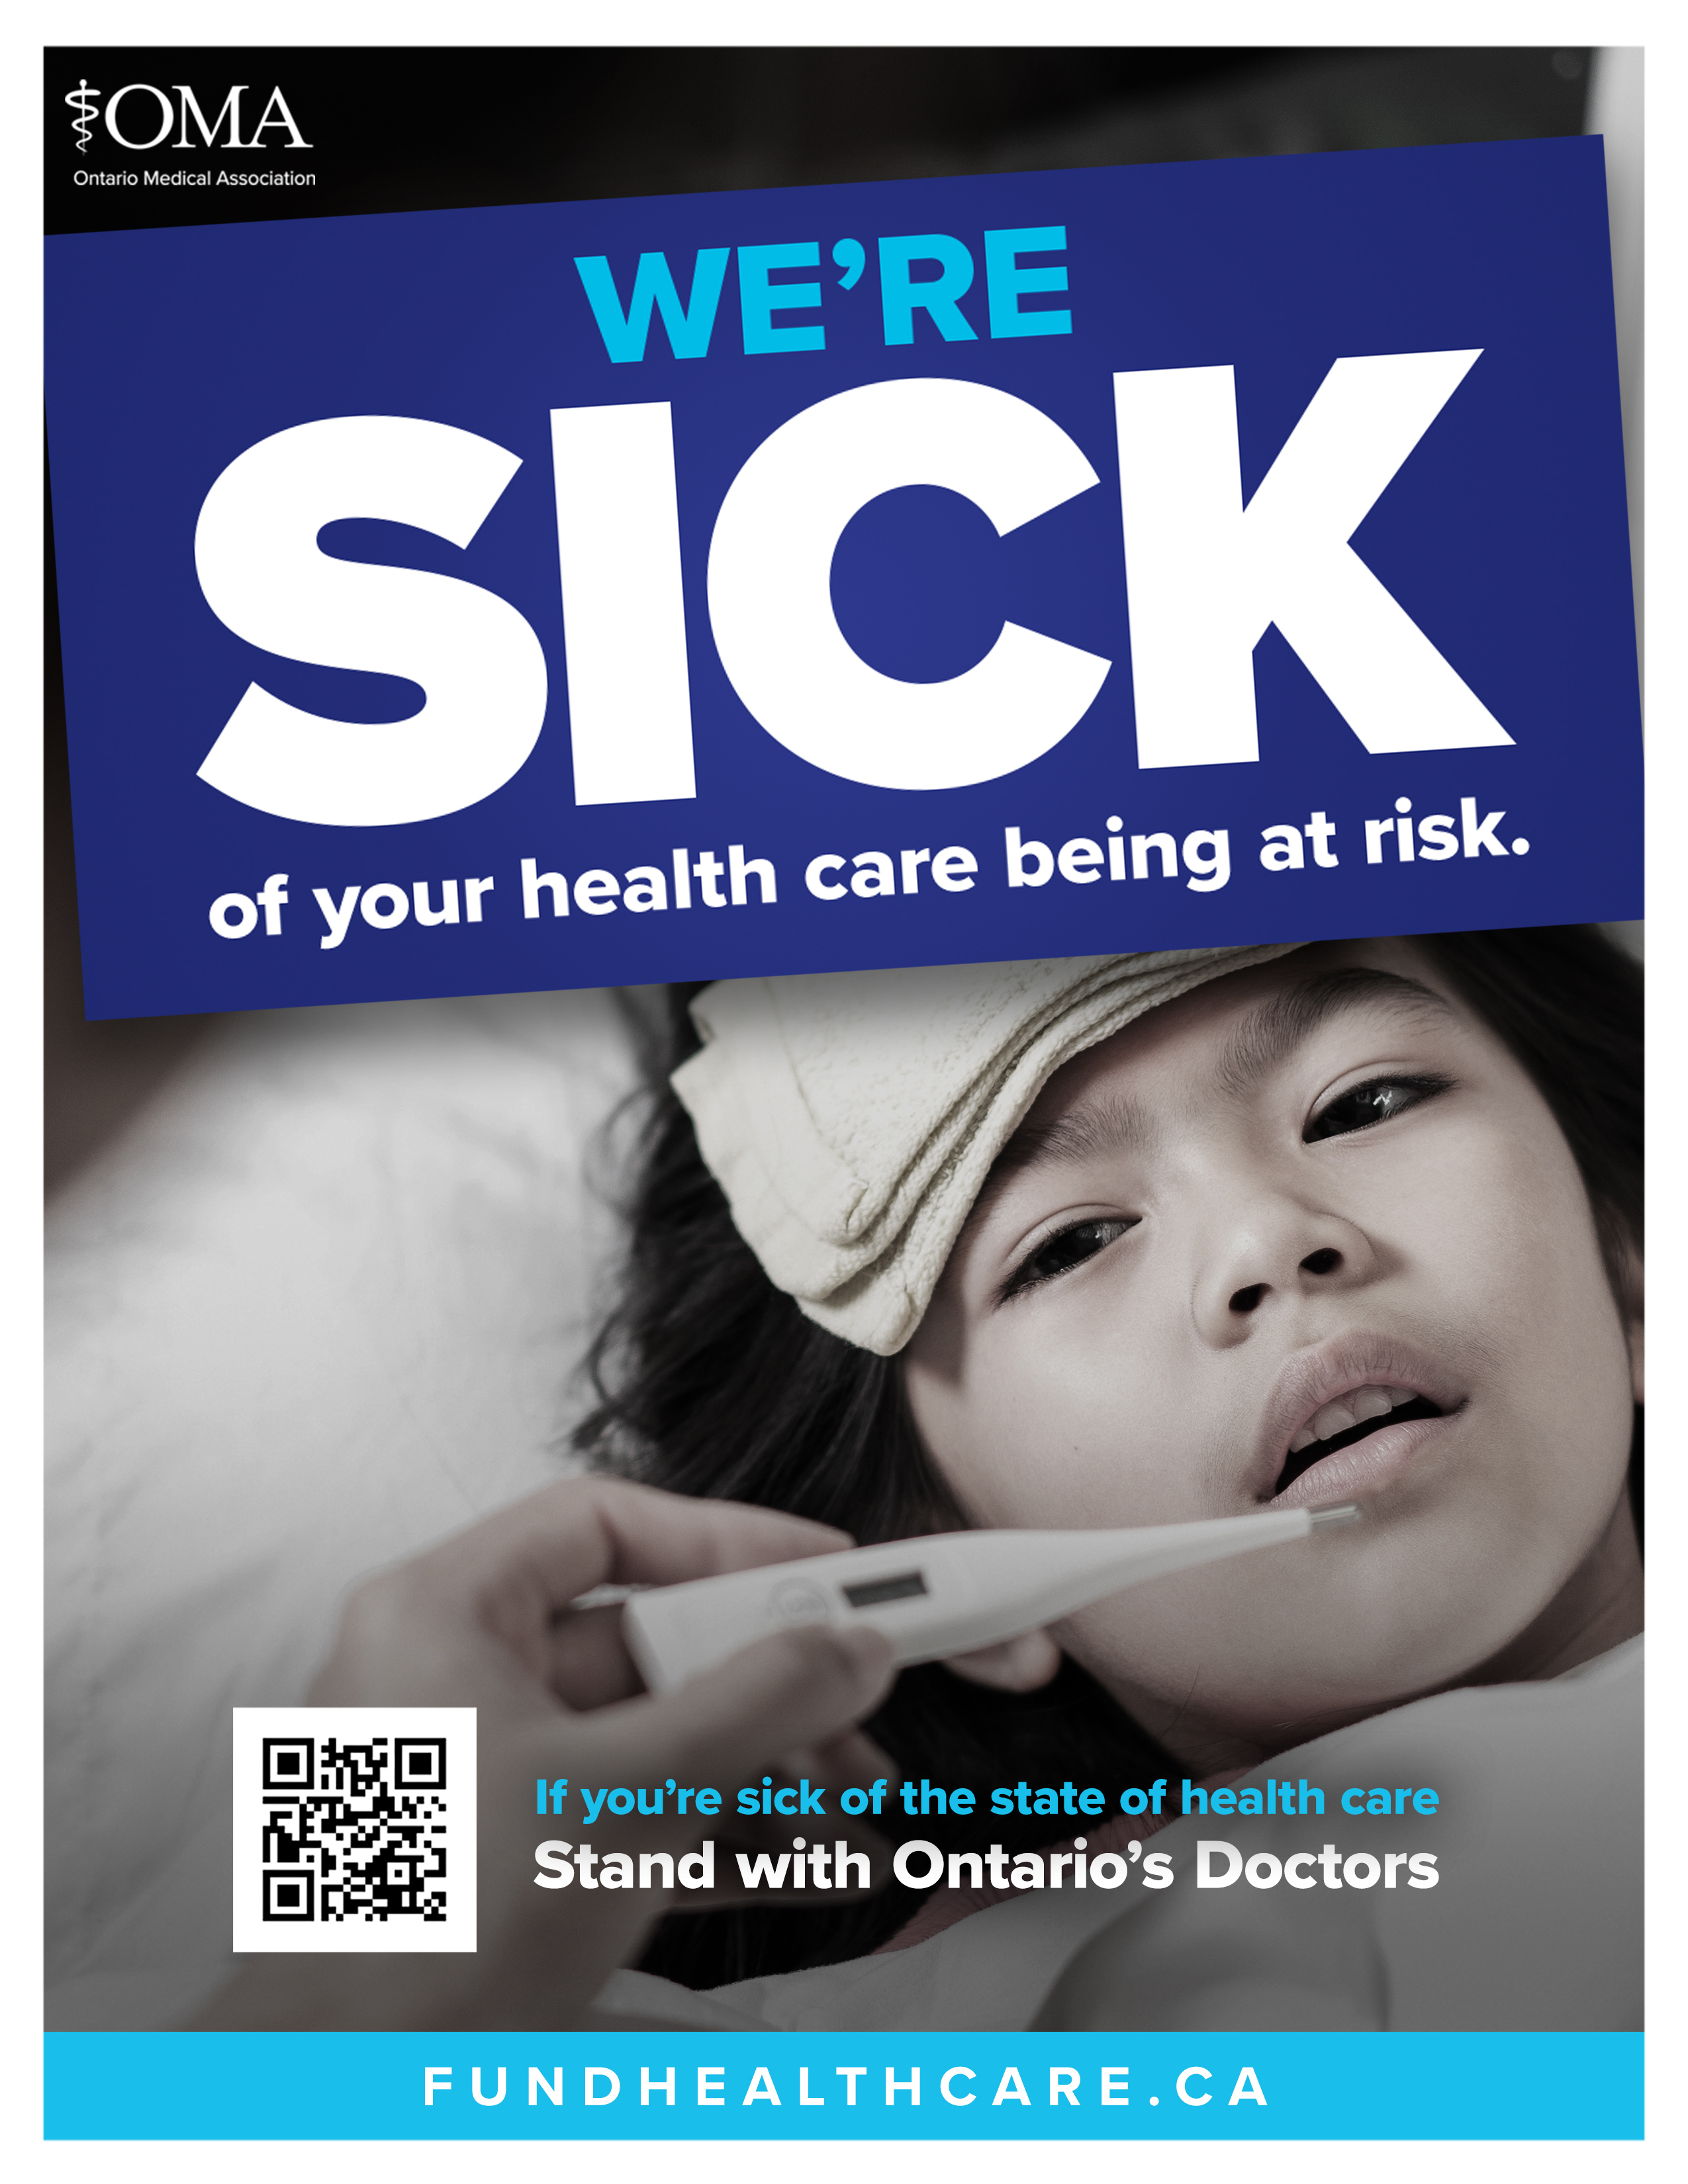 We're sick of sick of your healthcare being at risk poster